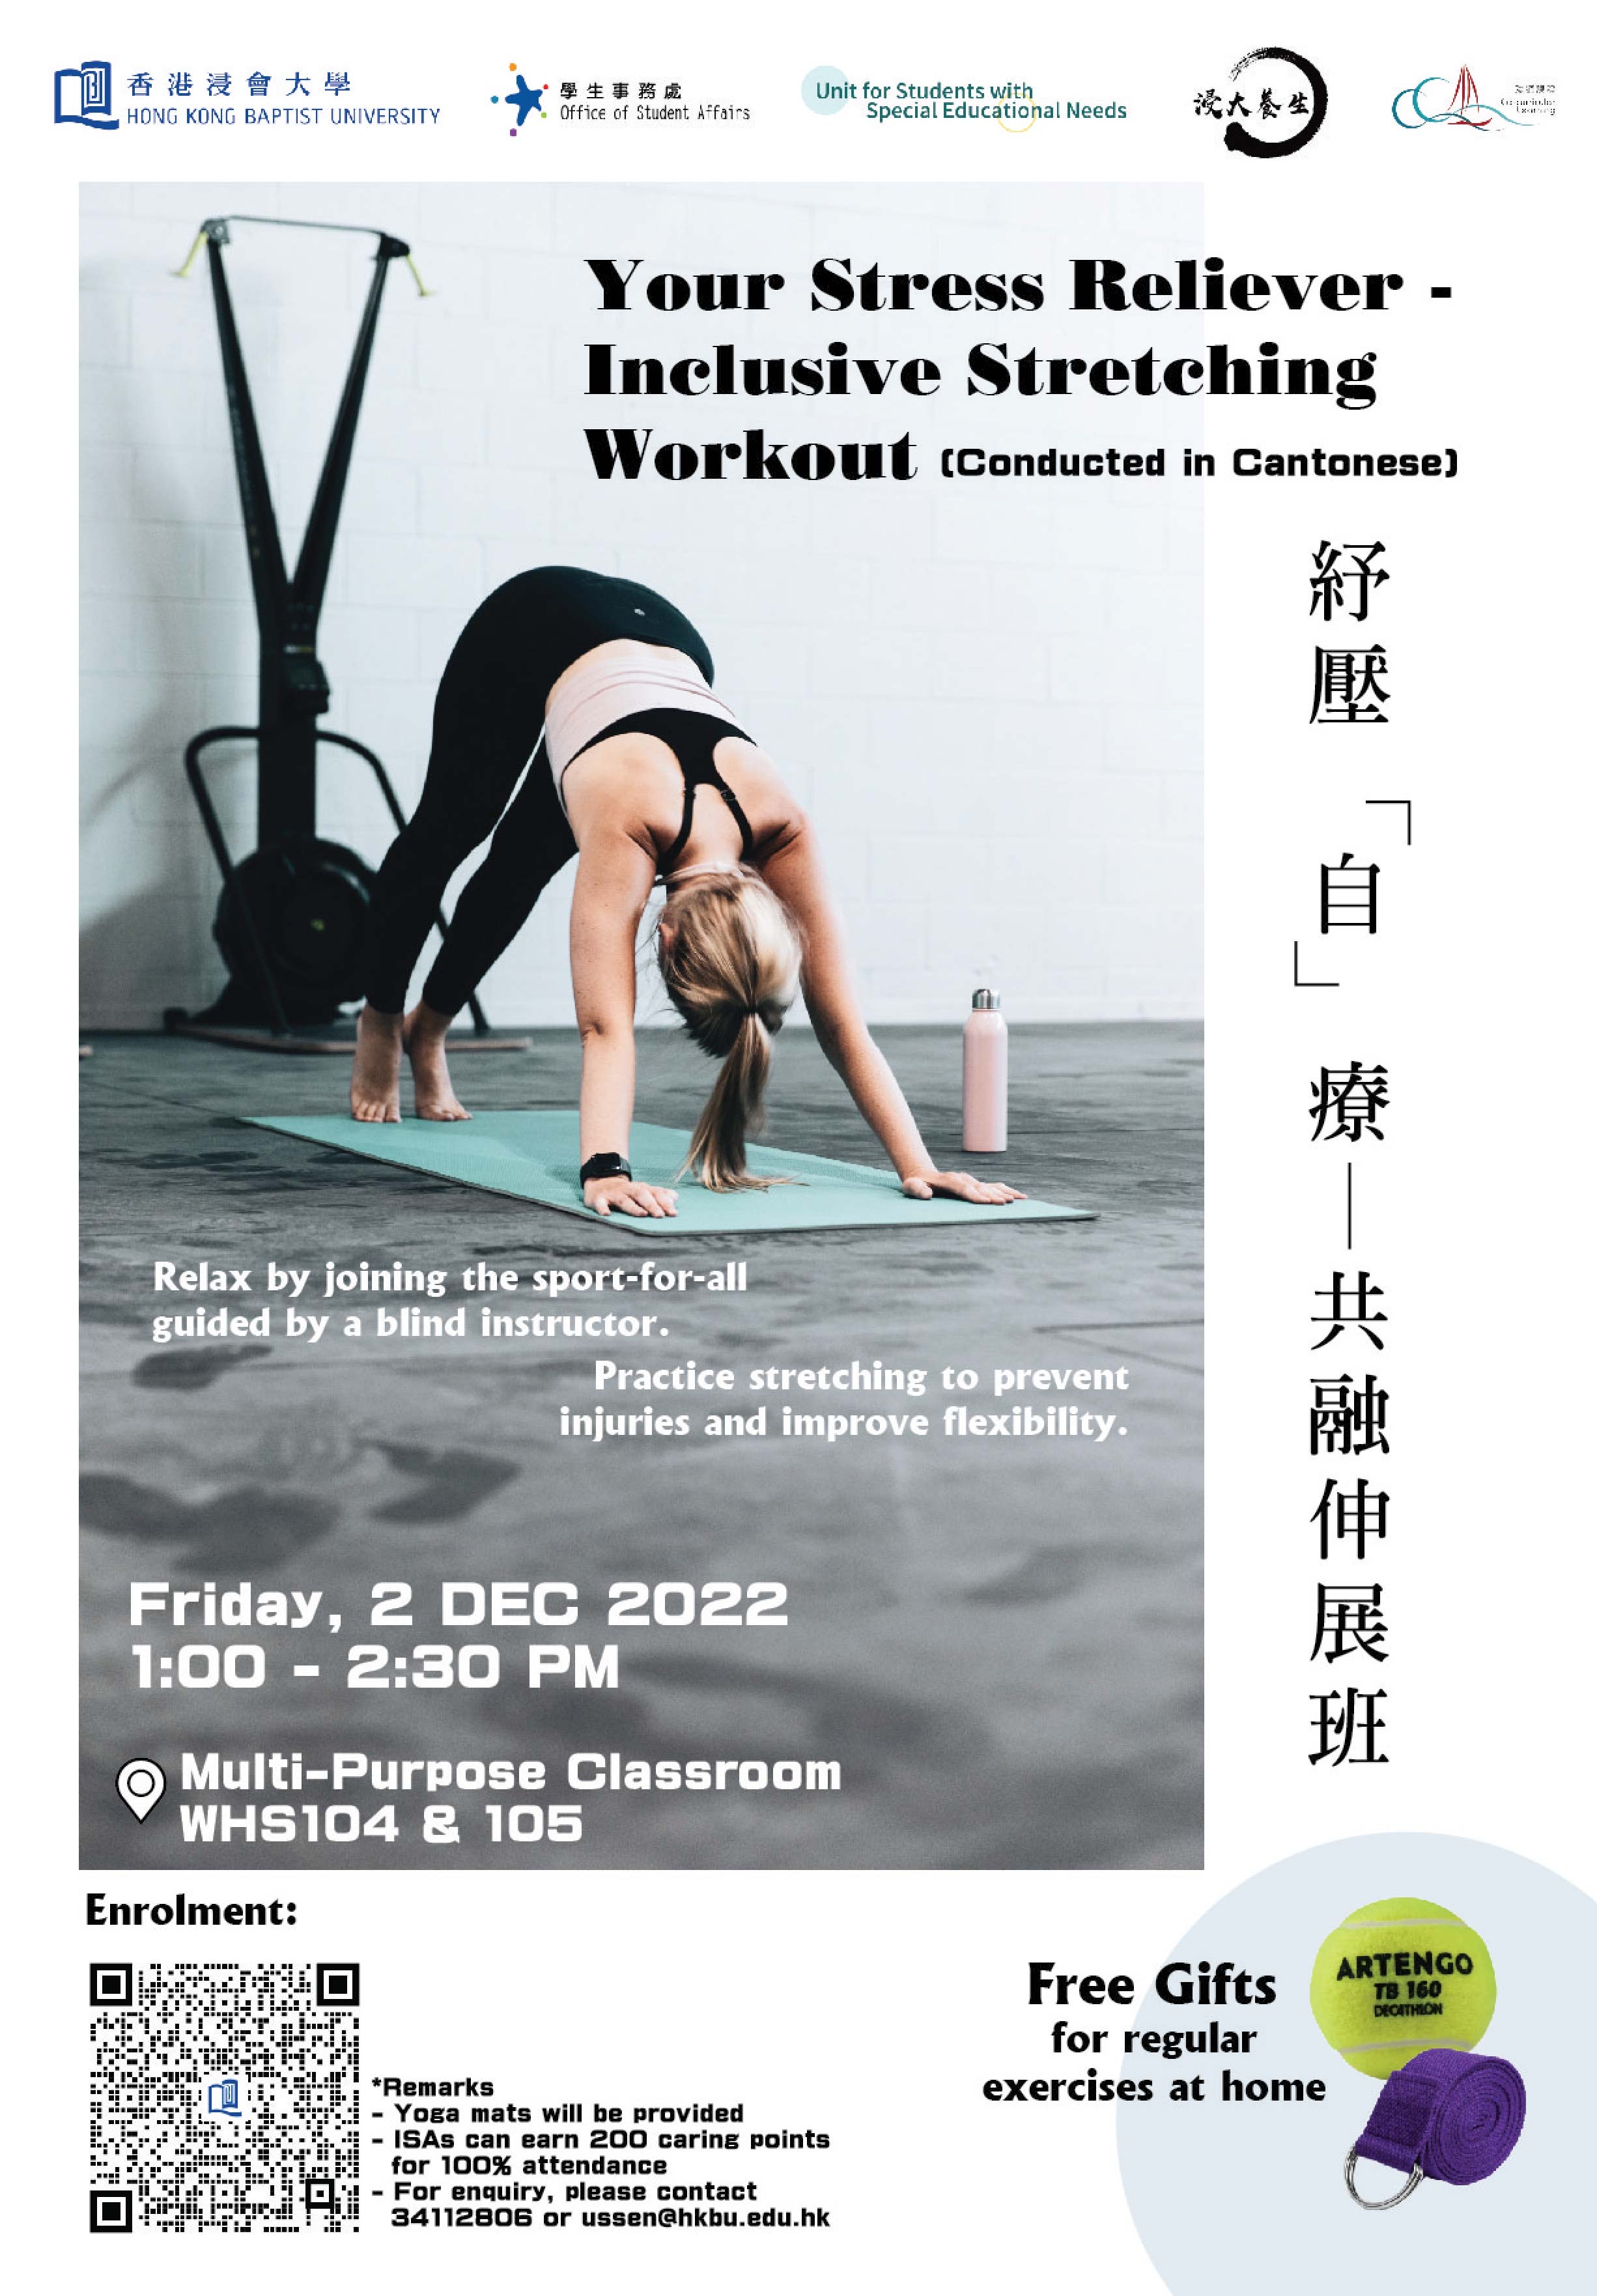 Your Stress Reliever – Inclusive Stretching Workout poster